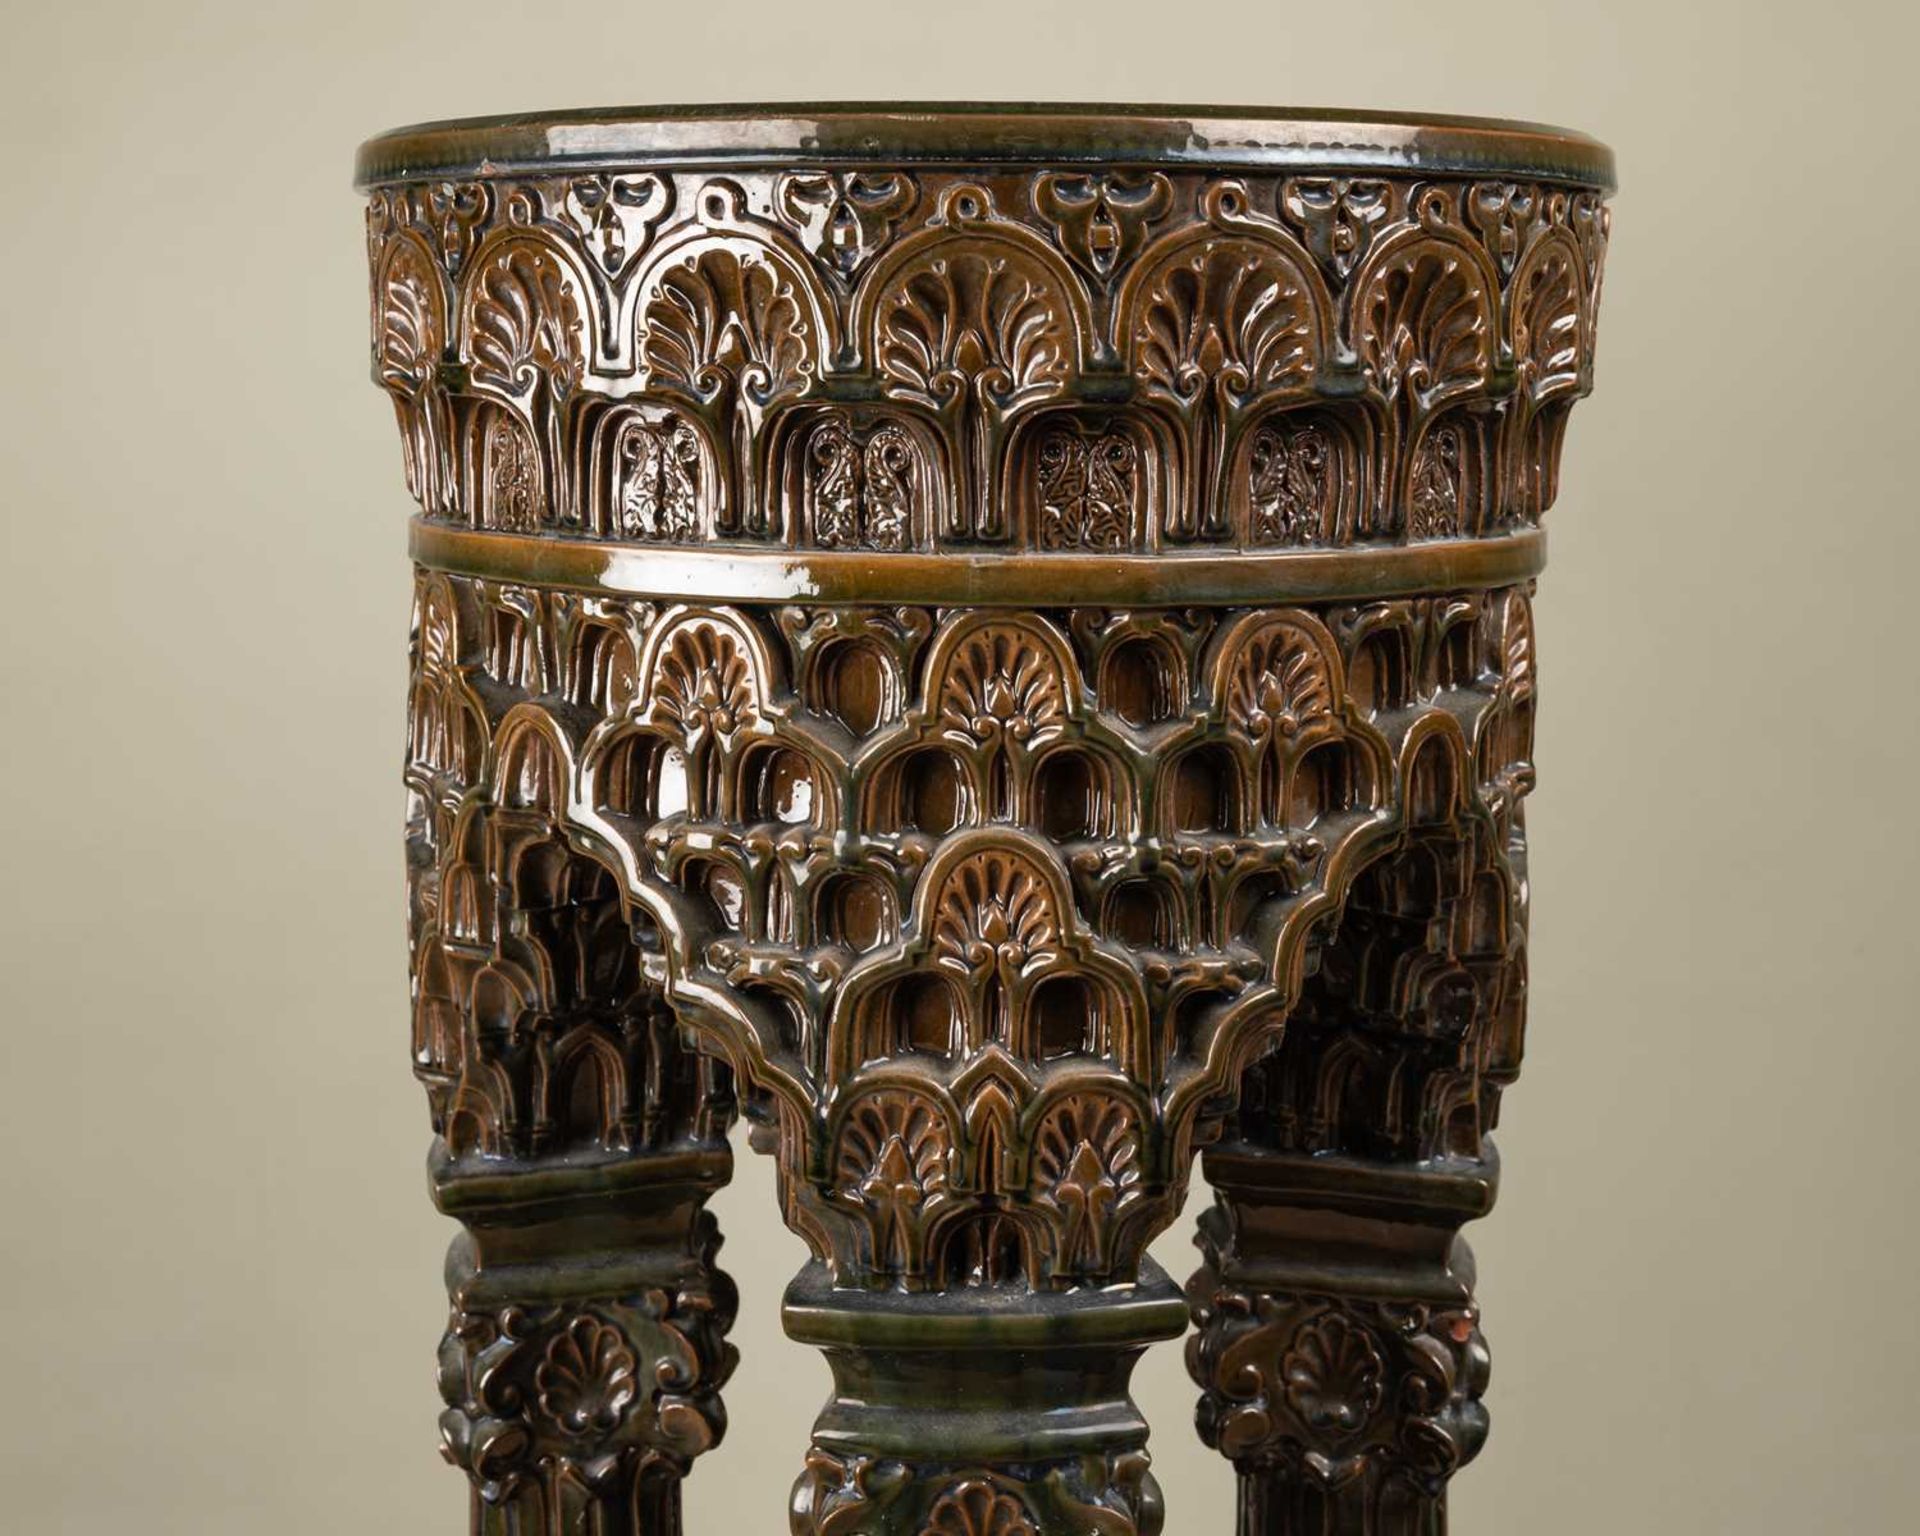 A Clement Massier (1844-1917) Alhambra jardiniere stand in green glazed terracotta, 42.5cm diameter, - Image 4 of 6